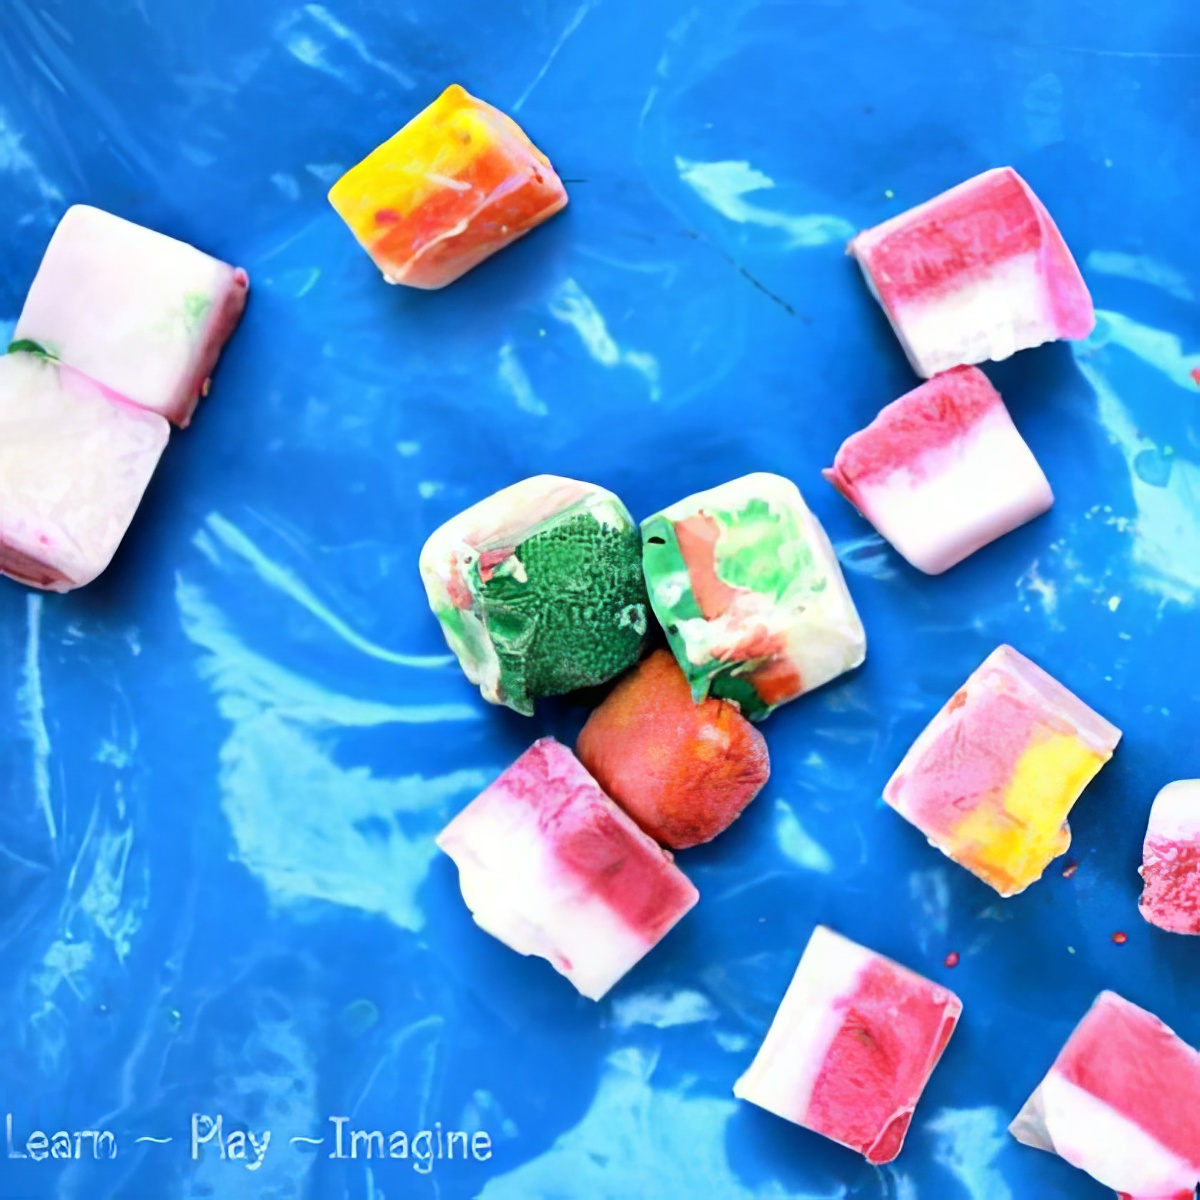 Get creative with your kids as you add colors to these ice cubes before freezing them this summer!